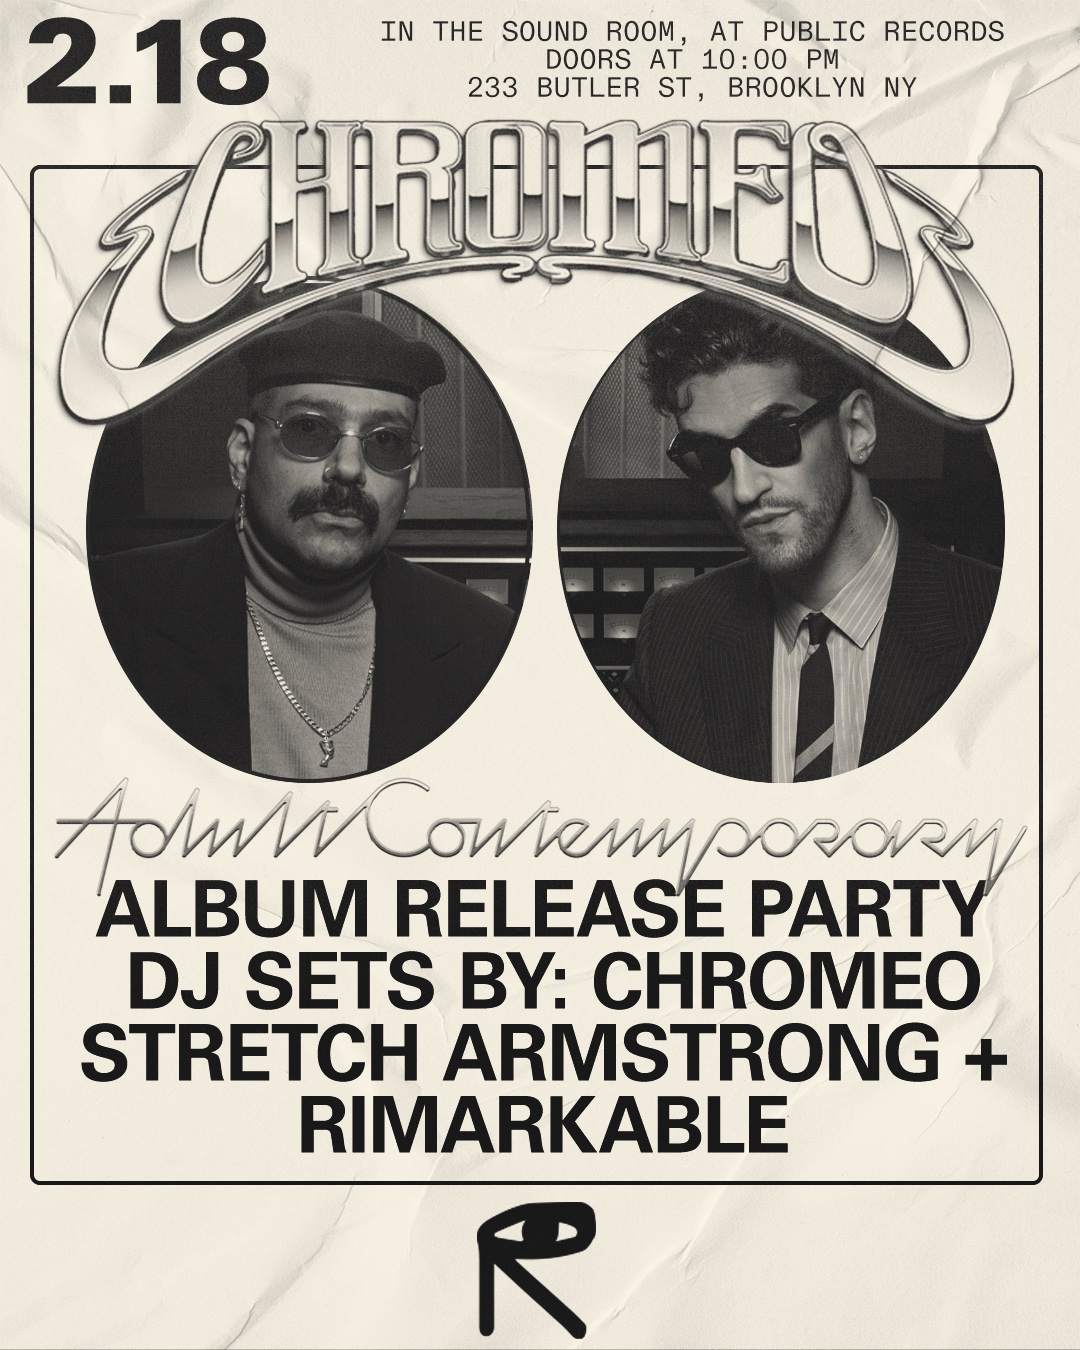 Chromeo Adult Contemporary Release Party: DJ Sets by Chromeo + Stretch Armstrong + Rimarkable - フライヤー表